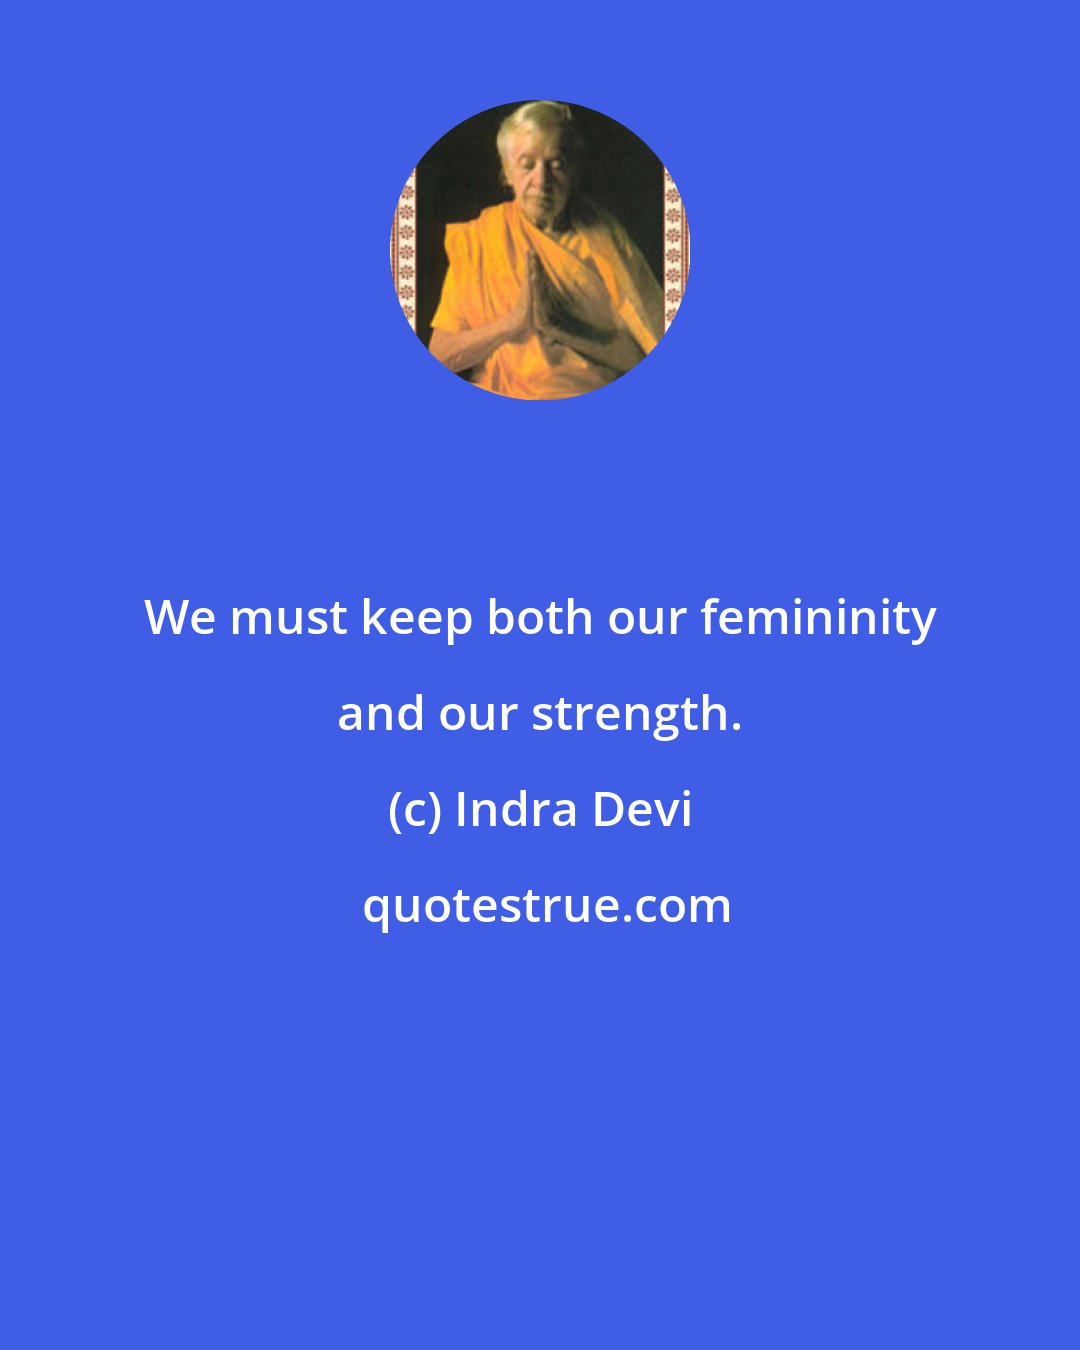 Indra Devi: We must keep both our femininity and our strength.